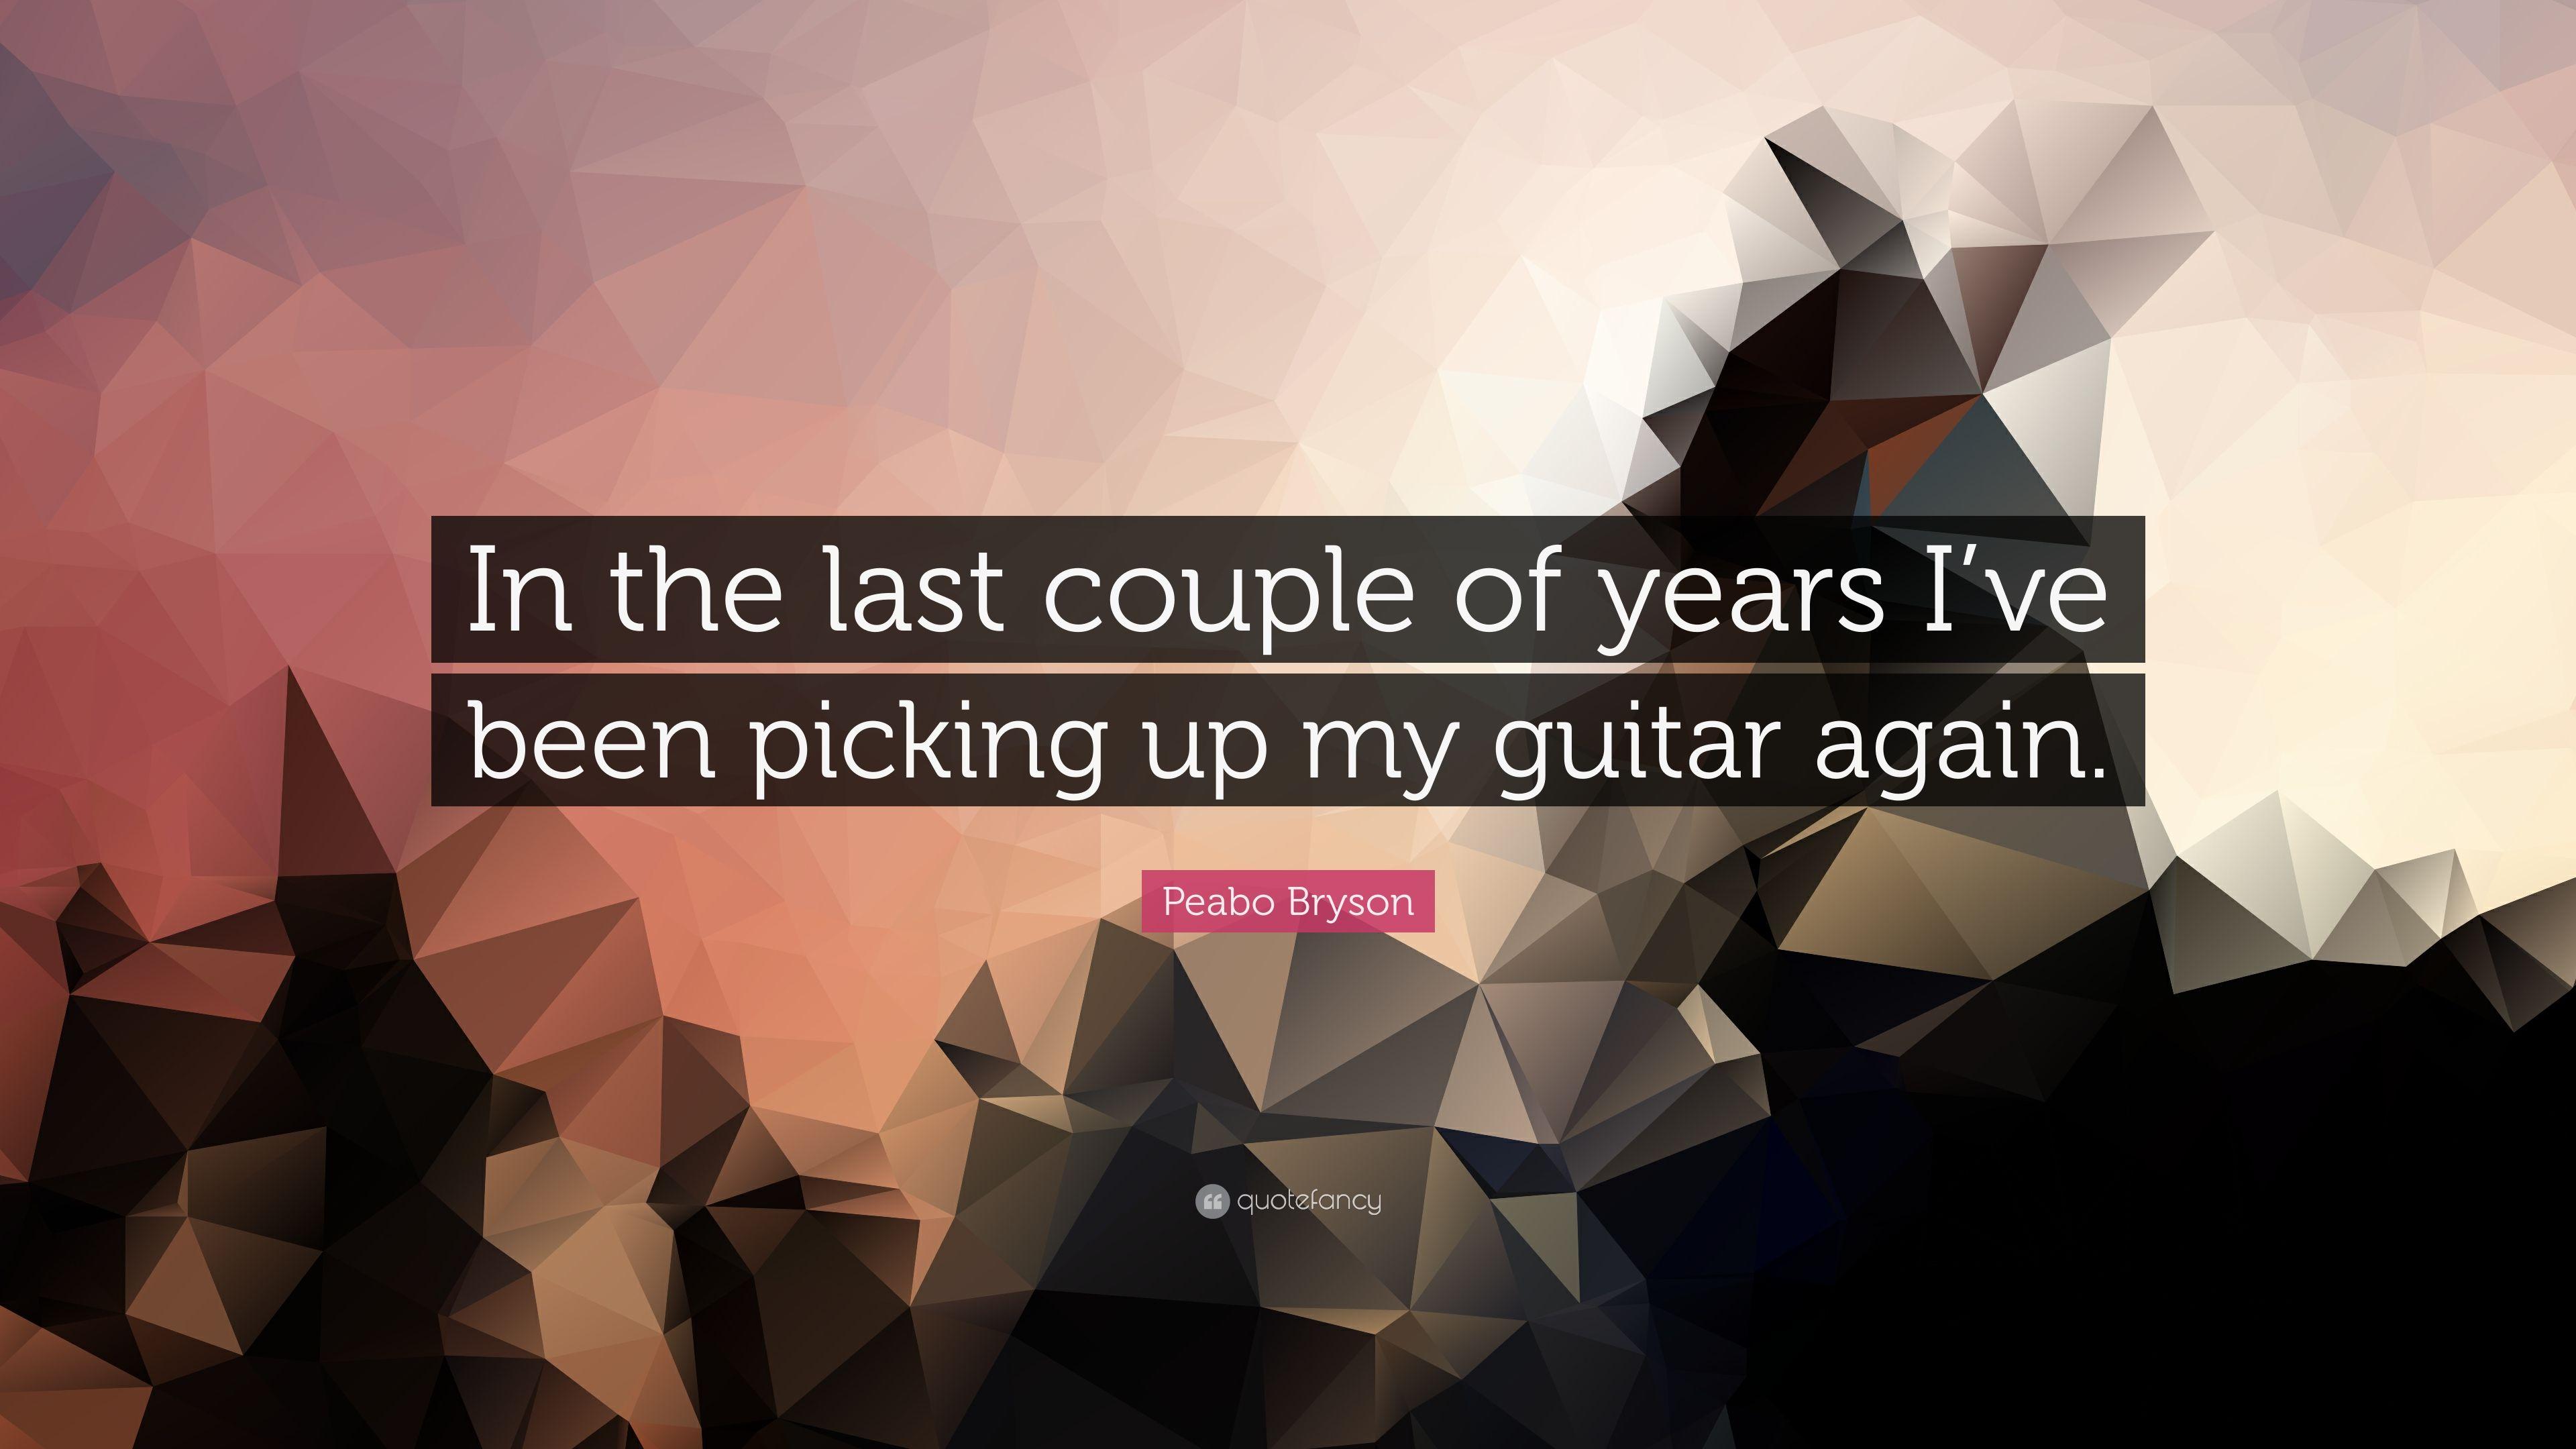 Peabo Bryson Quote: “In the last couple of years I've been picking